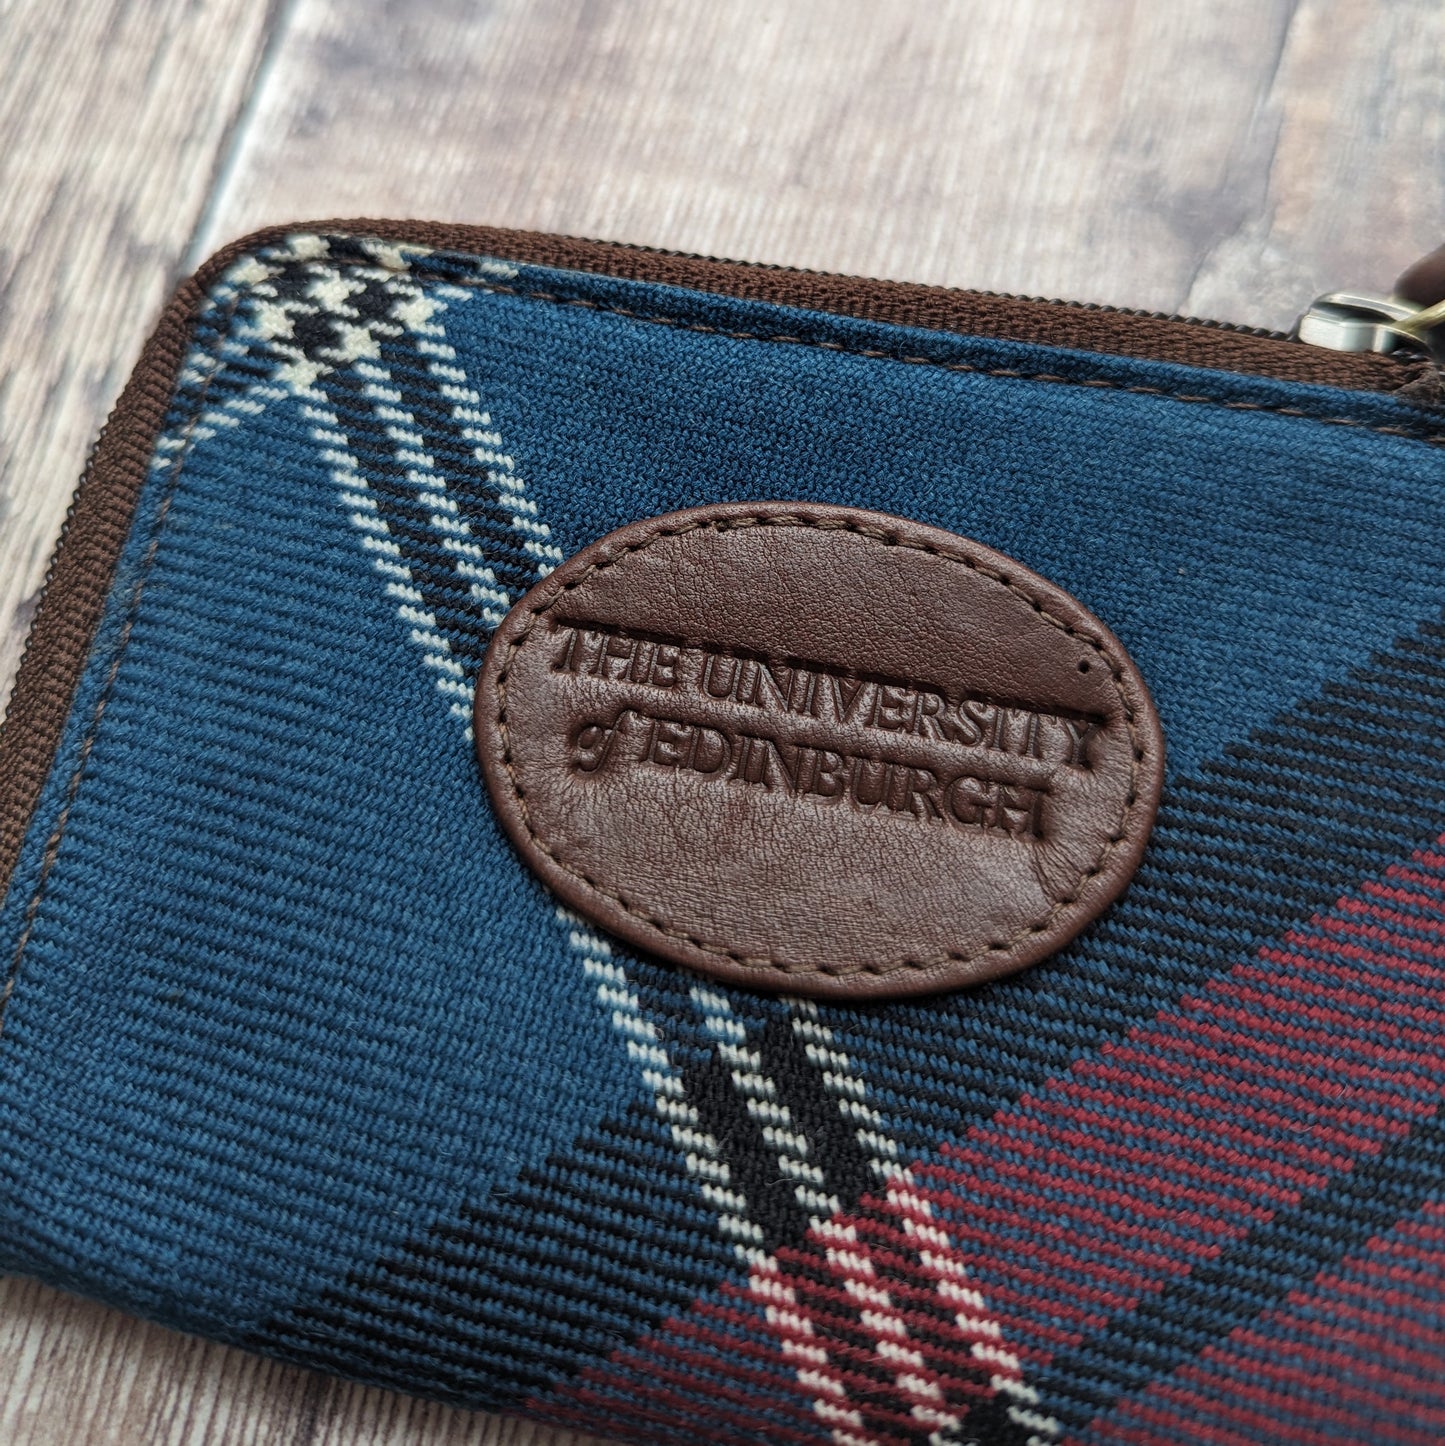 Tartan and Leather Pass Holder